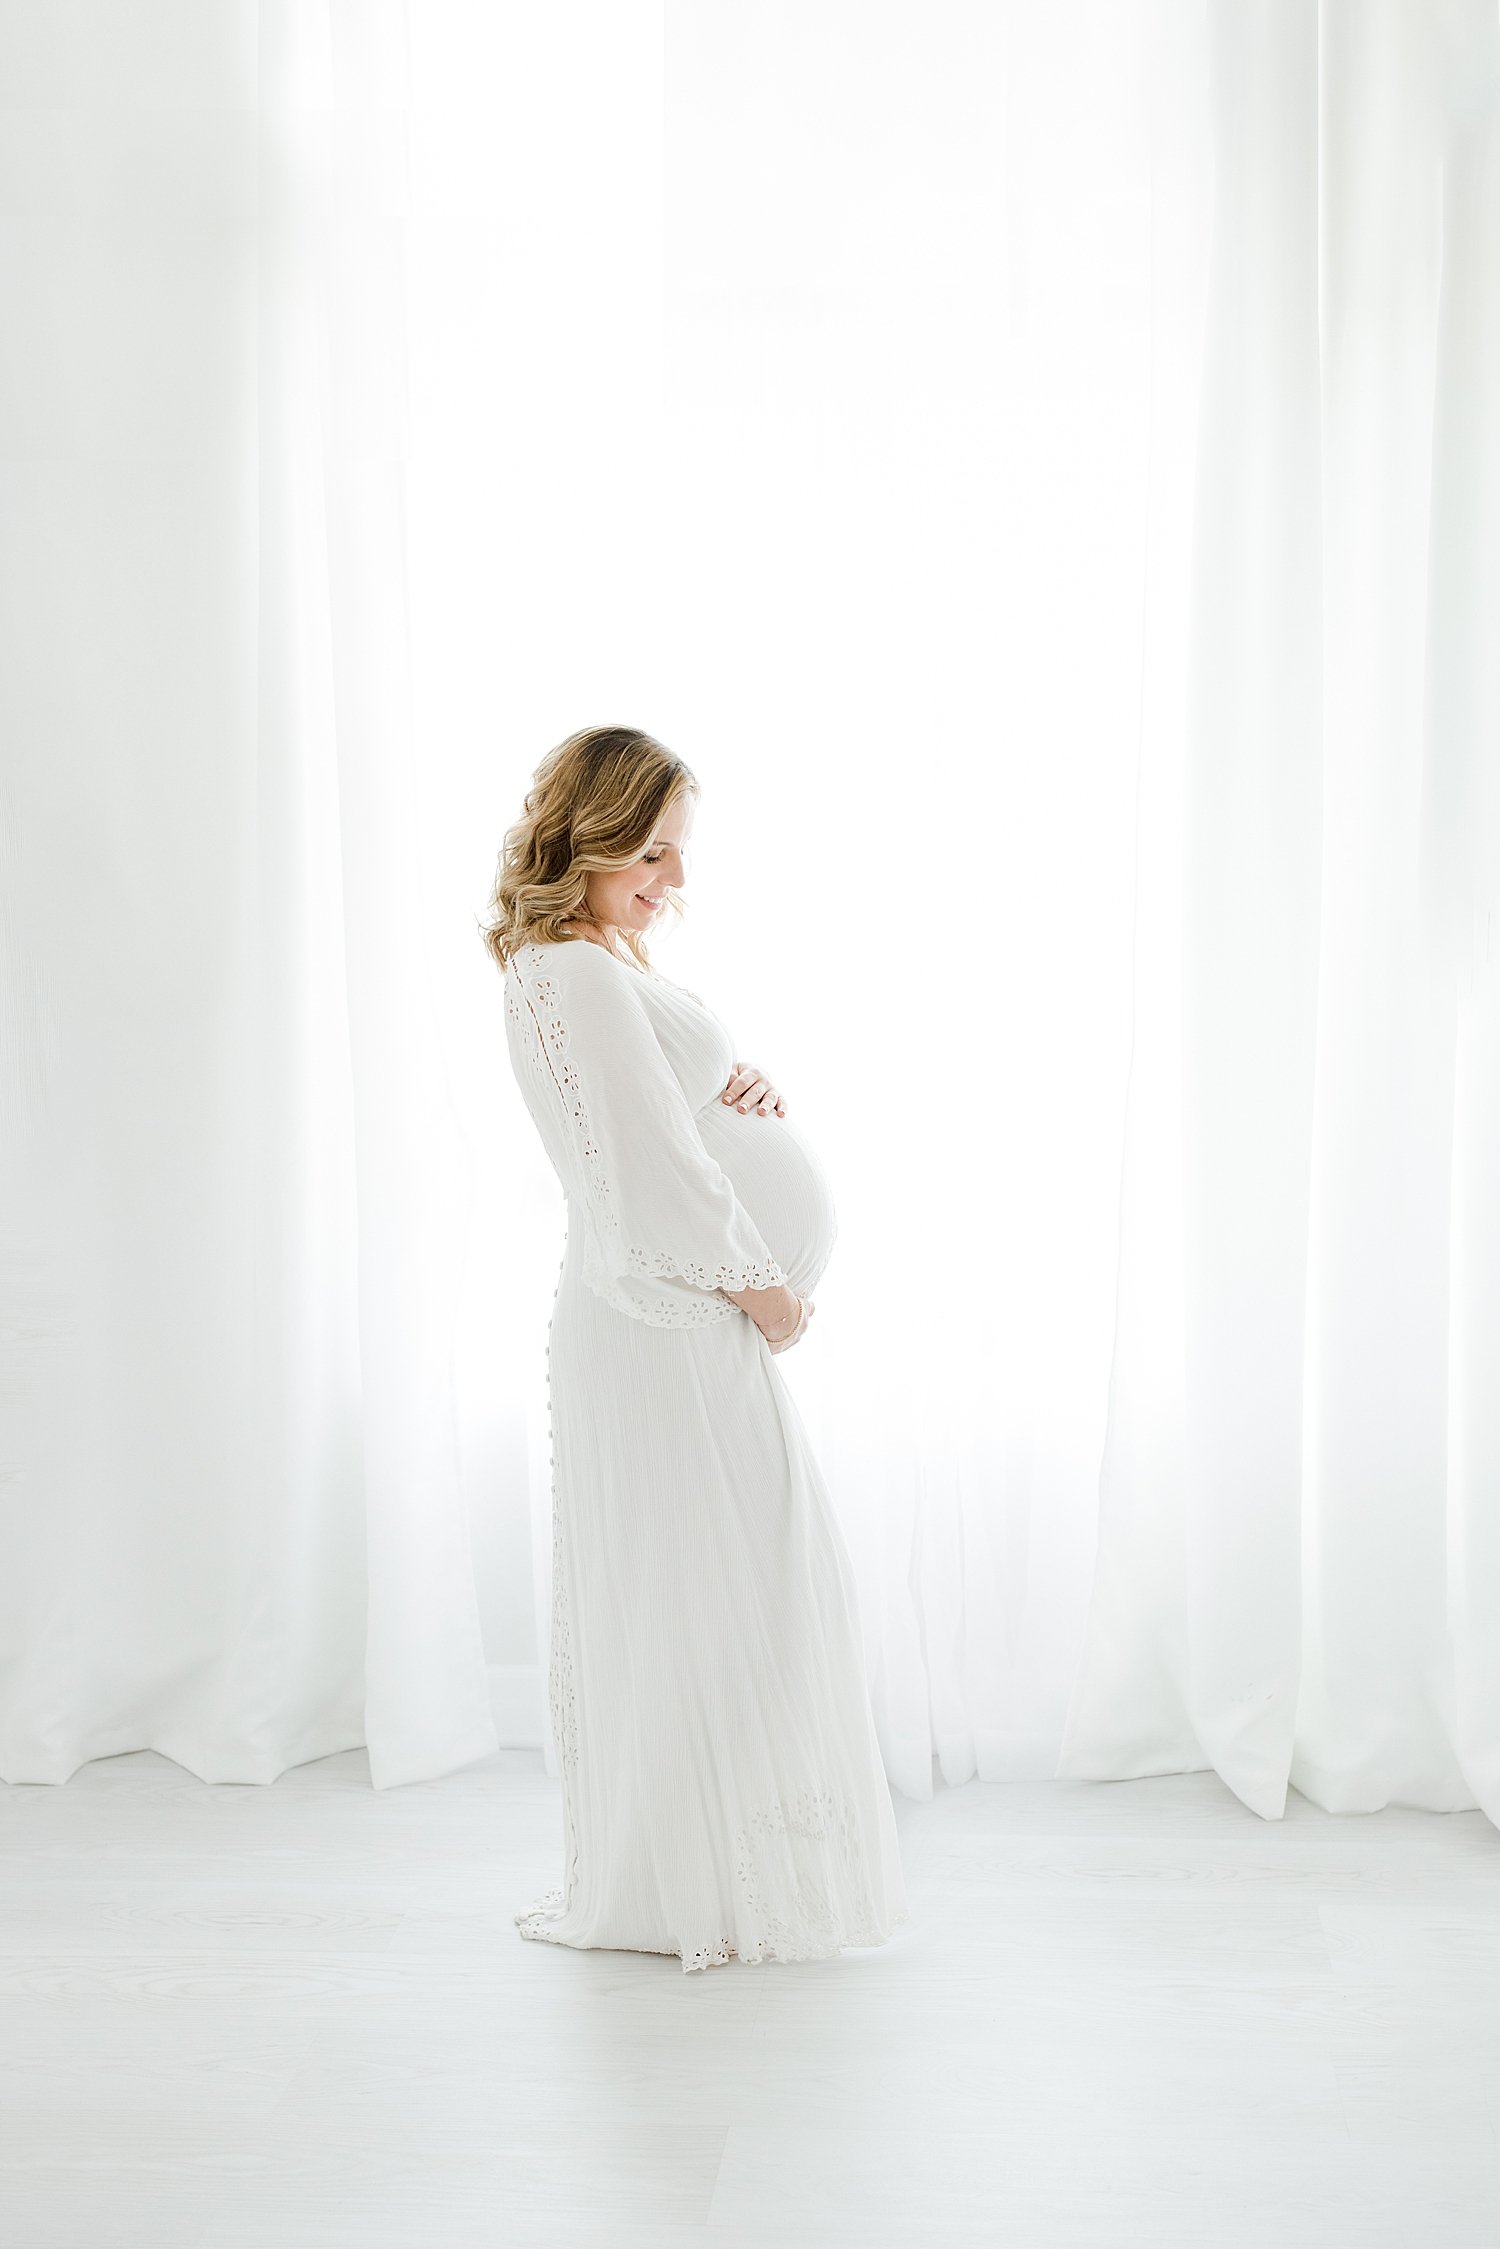 Pregnant mom in long white dress for maternity photos | Kristin Wood Photography